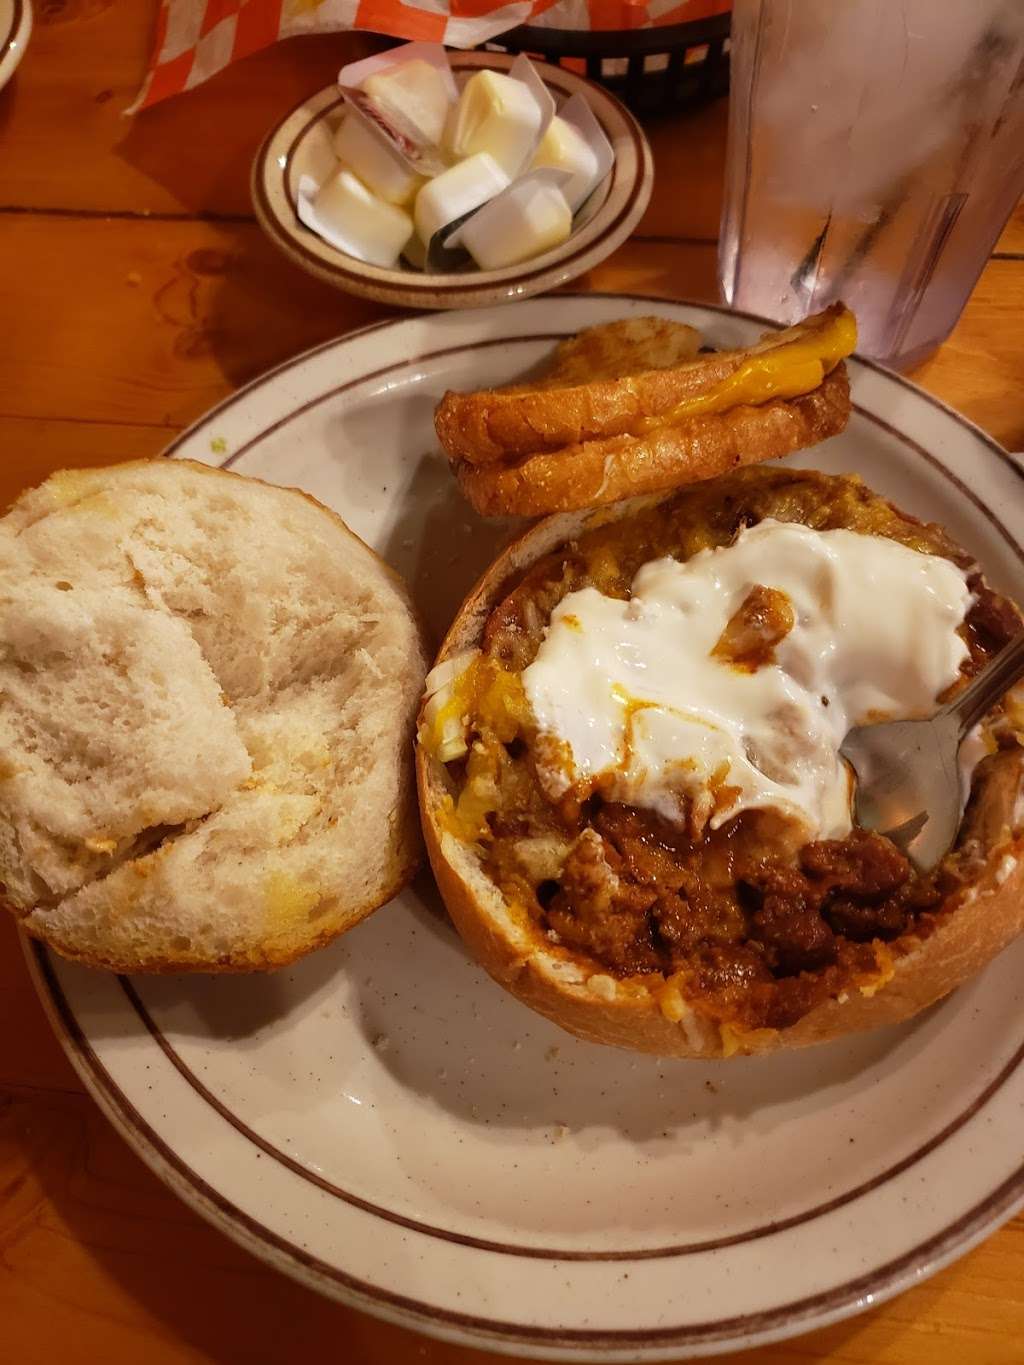 Northwoods Hearty Home Cookin & Saloon | 968 E Steger Rd, Crete, IL 60417 | Phone: (708) 572-4984